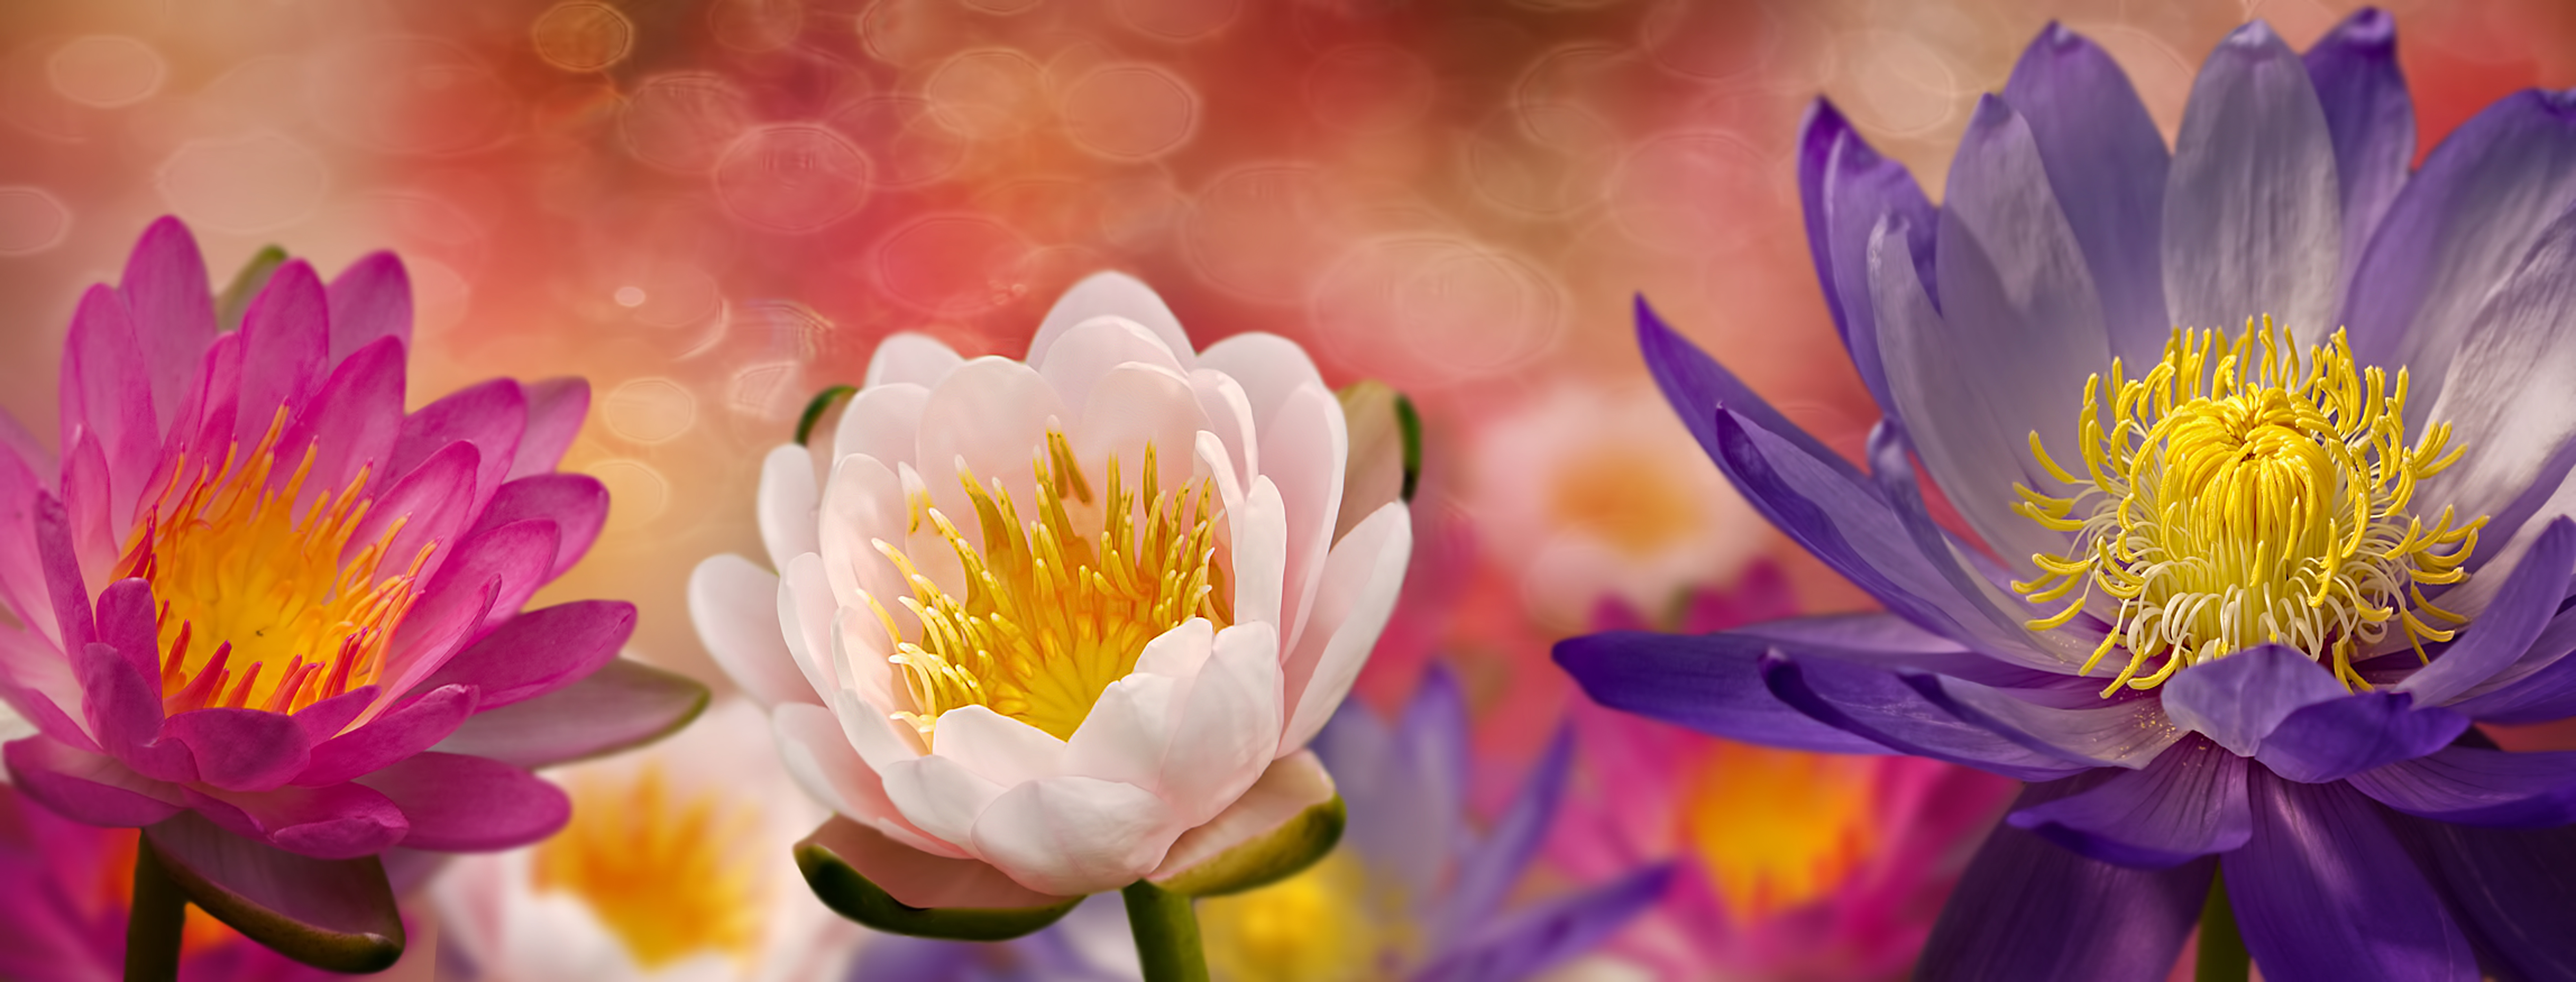 Wallpapers flora water Lily panorama on the desktop